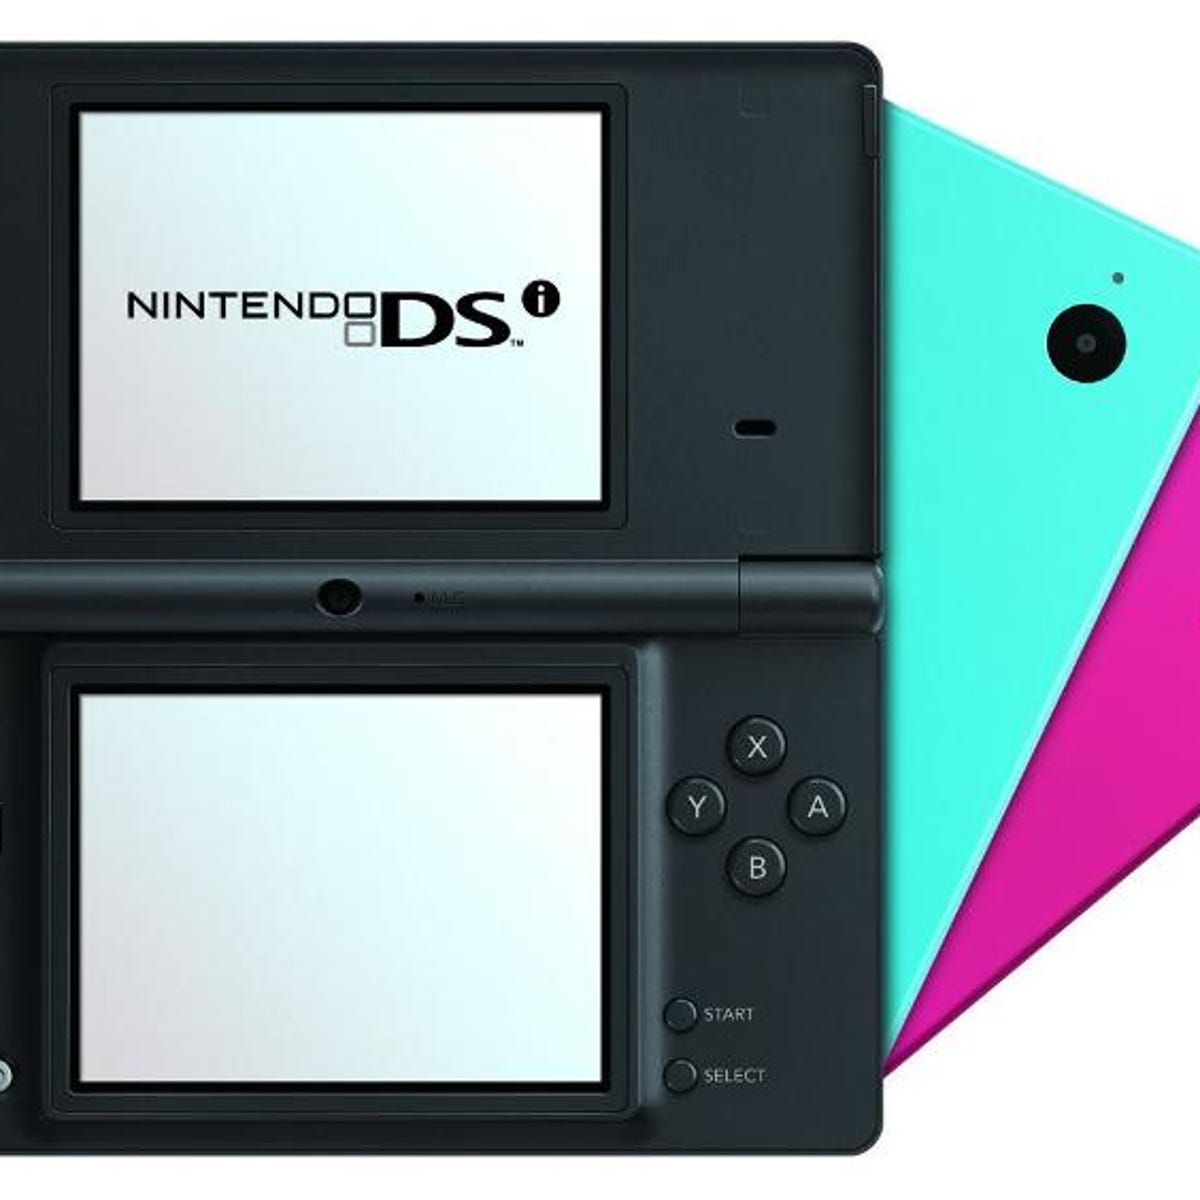 Nintendo and DSi drop to $129 - CNET